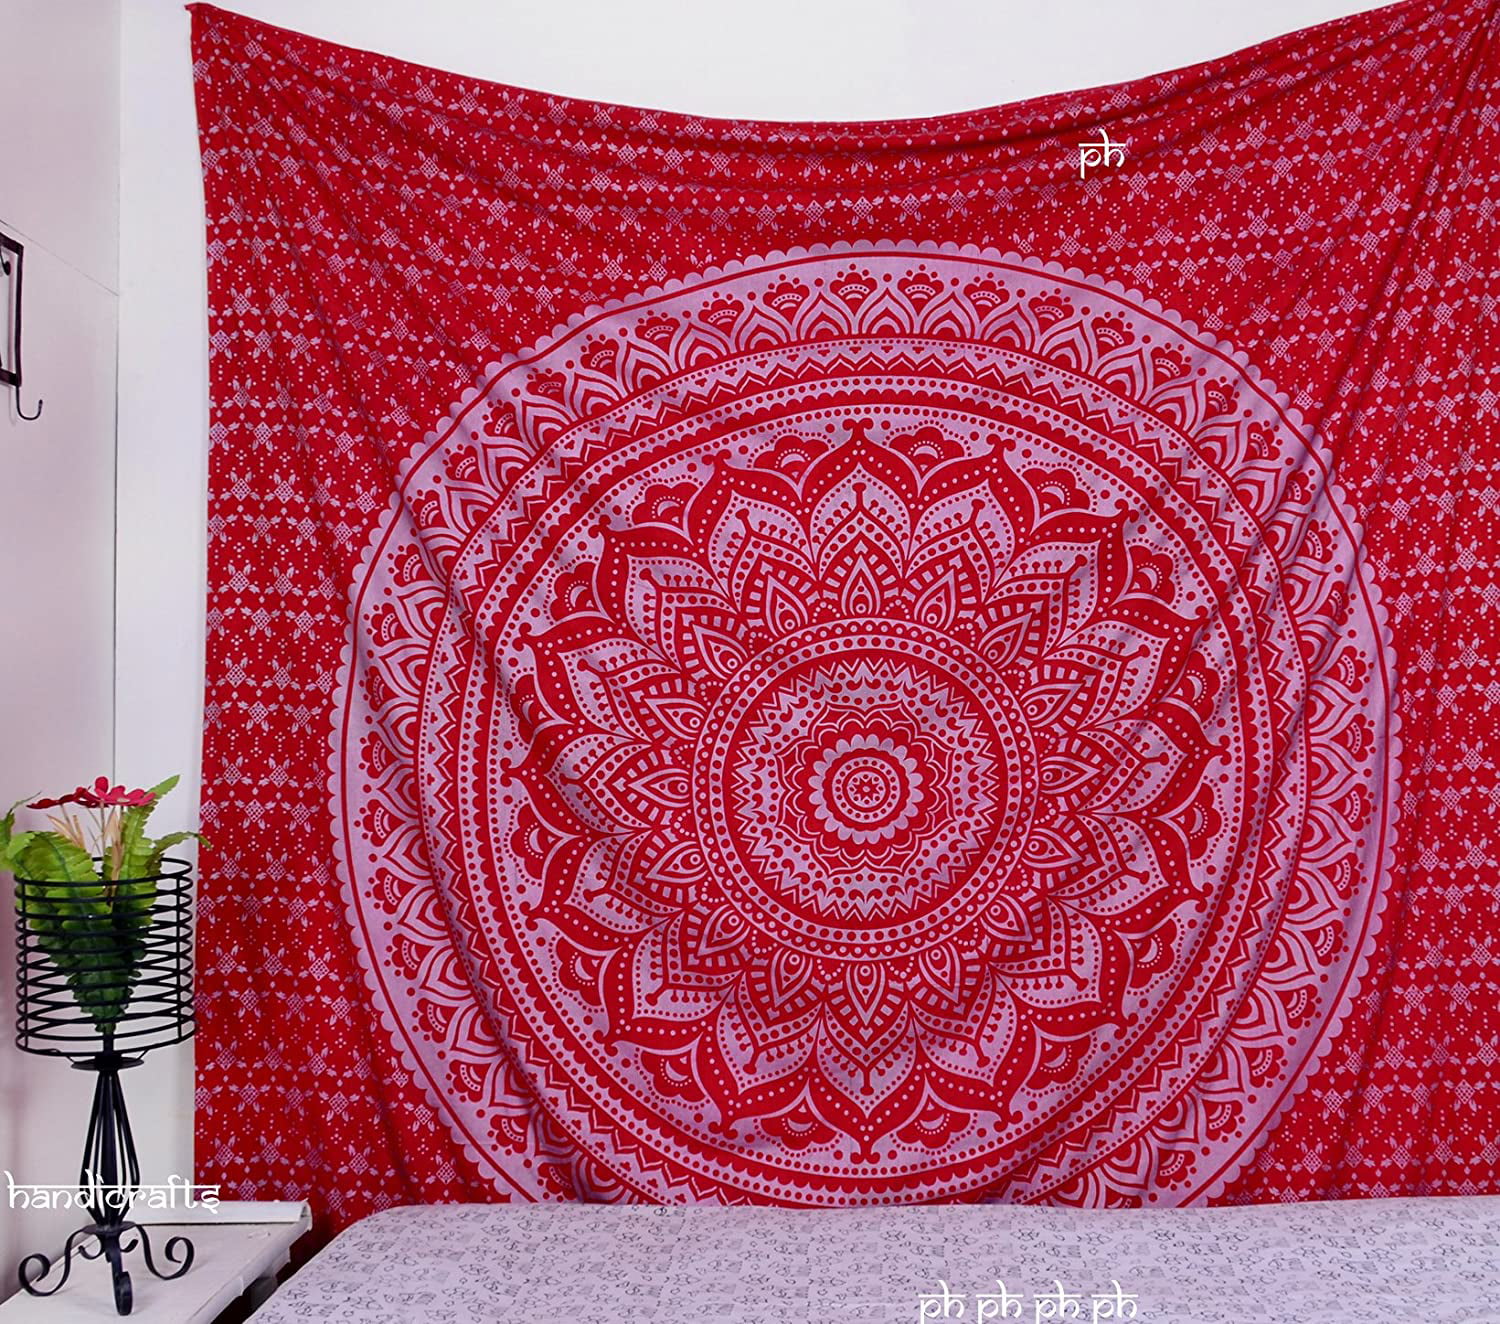 Details about   Hippie Ombre Mandala Tapestry Wall Hanging Boho Throw Bedspread Ethnic Decor Art 